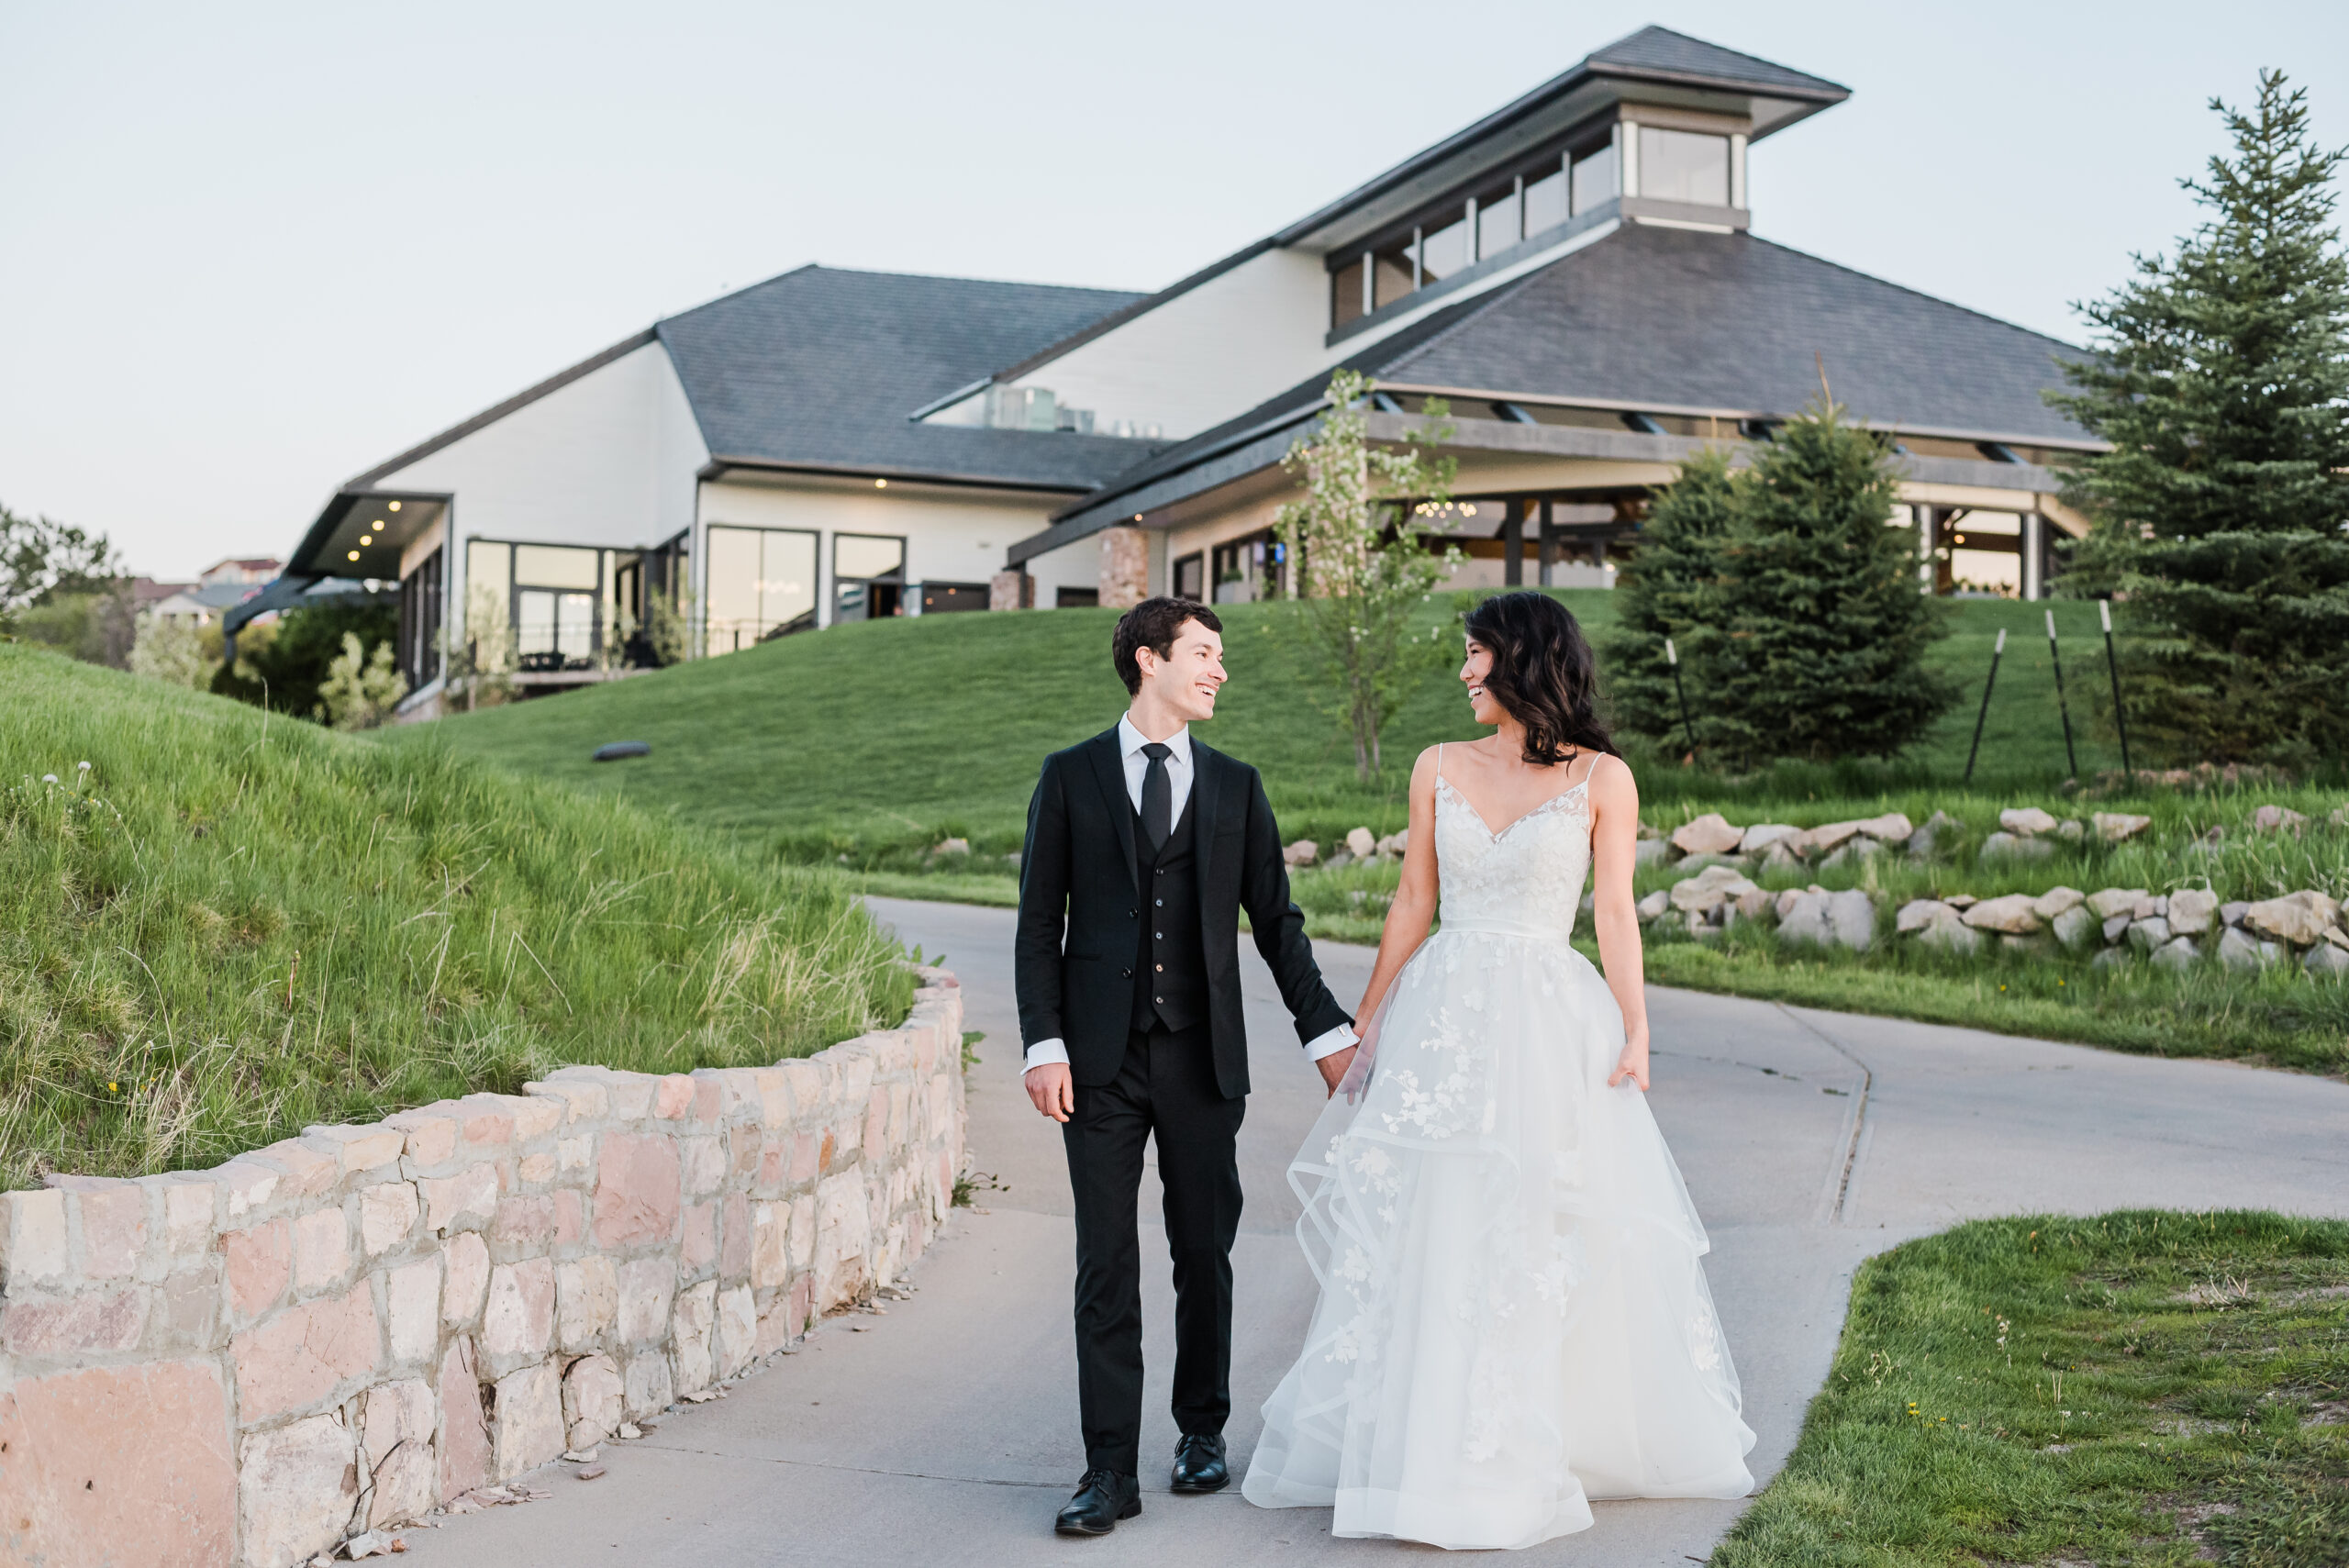 Bride and groom walk hand in hand while looking at each other along a sidewalk path near the wedding venue The Oaks in Castle Rock